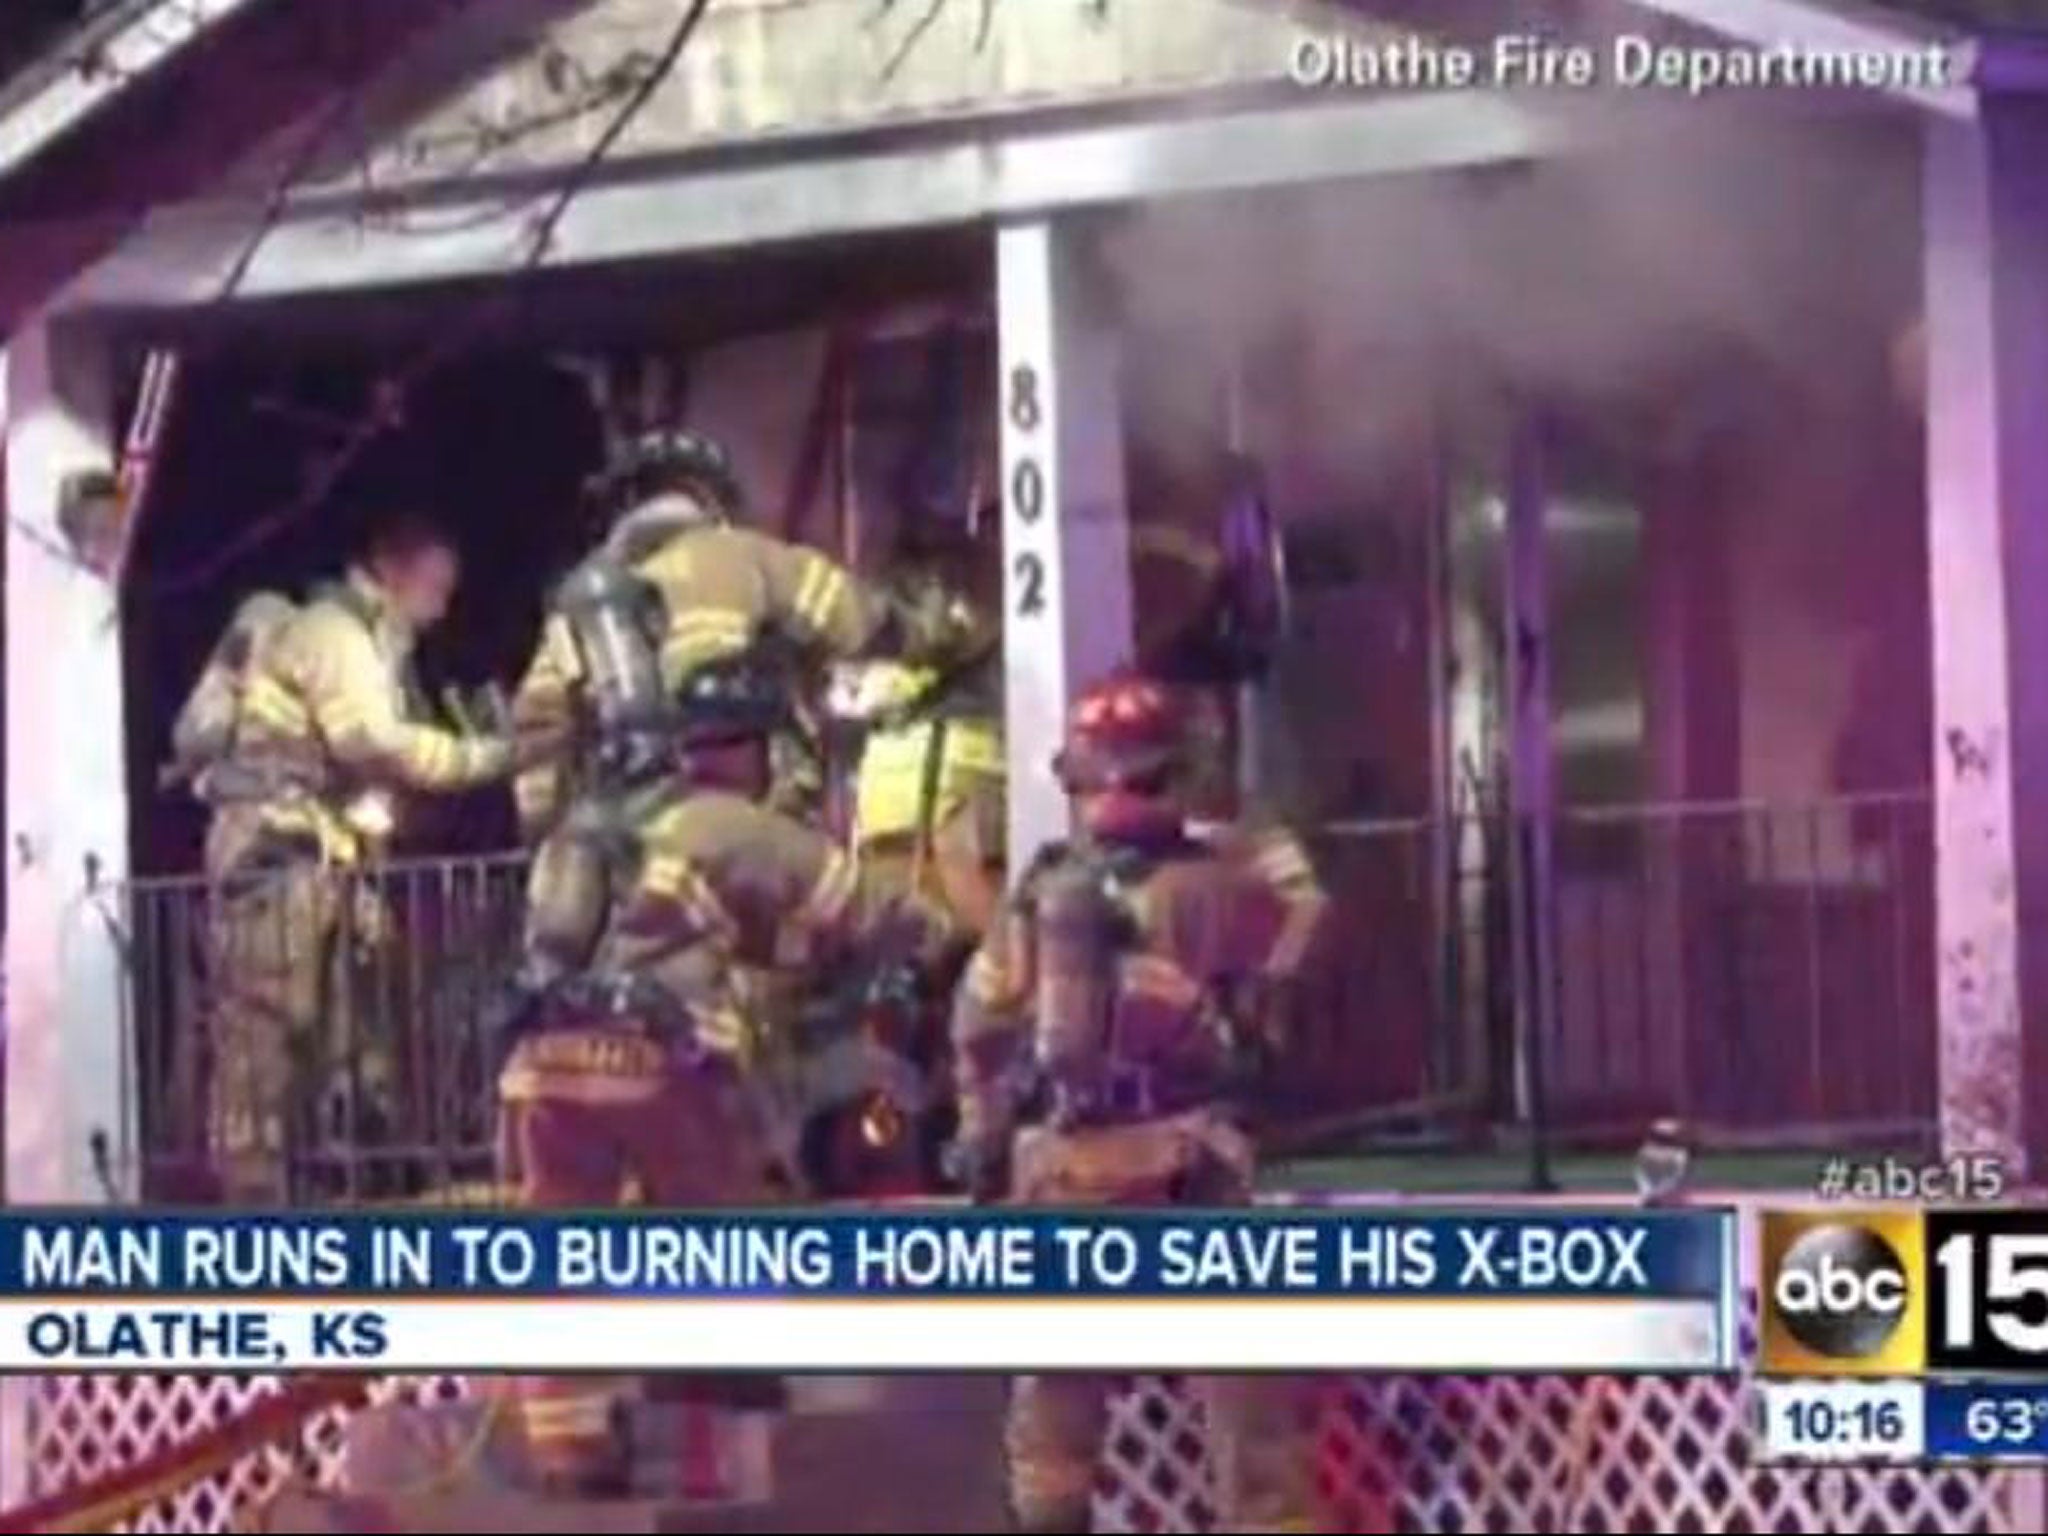 A Kansas man risked his life by running back into a burning house to retrieve his X-box